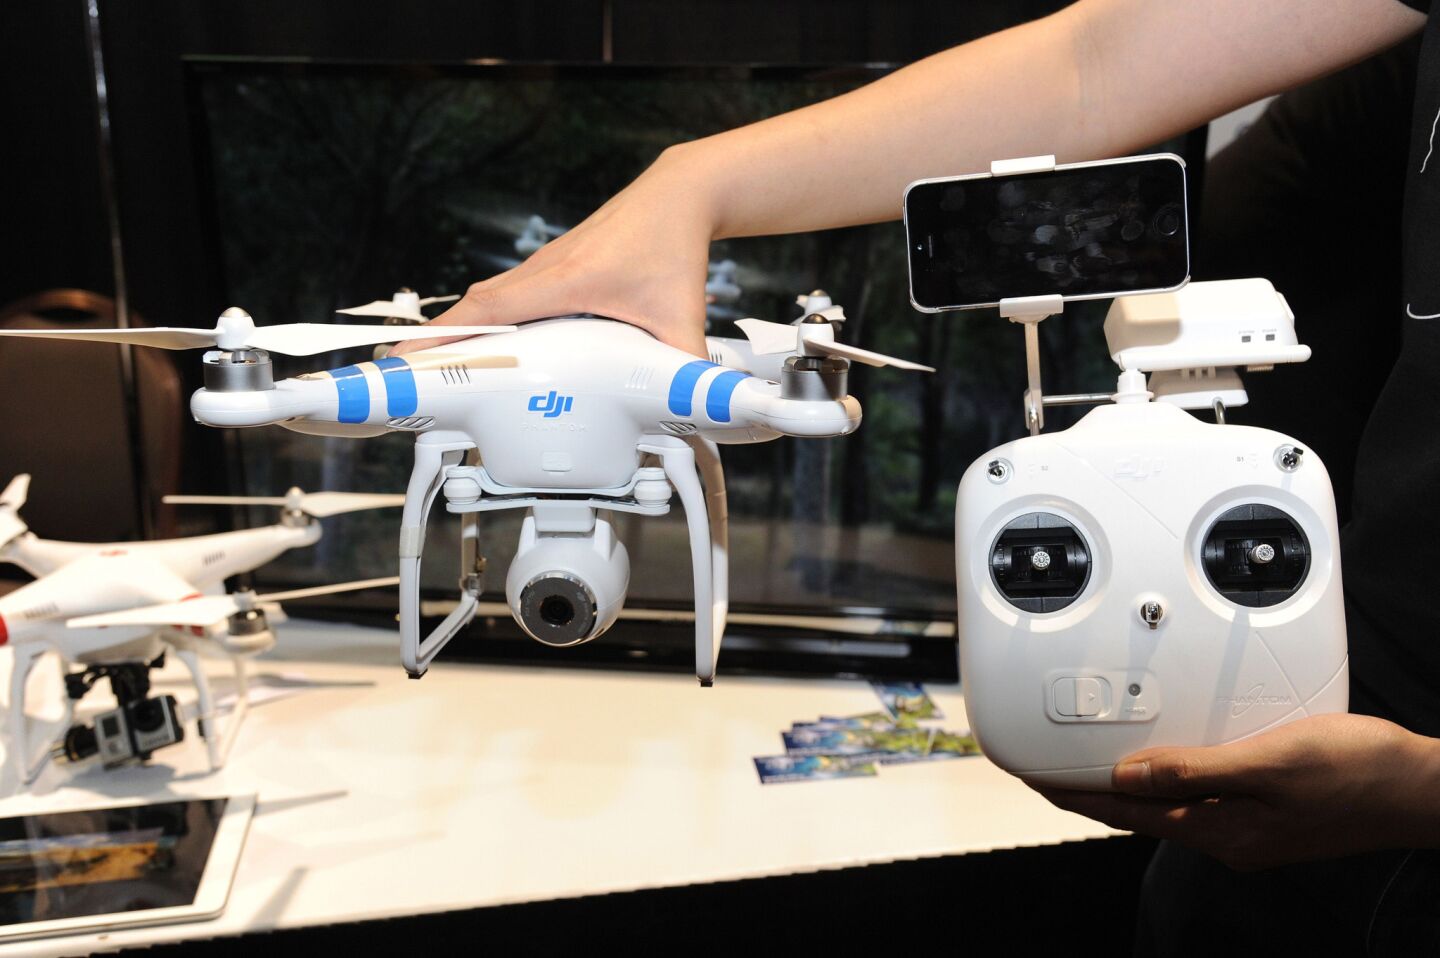 A DJI Innovations DJI Phantom 2 Vision aerial system drone with controller, right, is shown during "CES: Unveiled," the media preview for International CES. The Phantom 2 Vision, available for $1,199, has a 14-megapixel camera on board that can shoot raw photos and 1080p video. The video can be seen live and can be stored on an iPhone or Android smartphone attached to the controller.